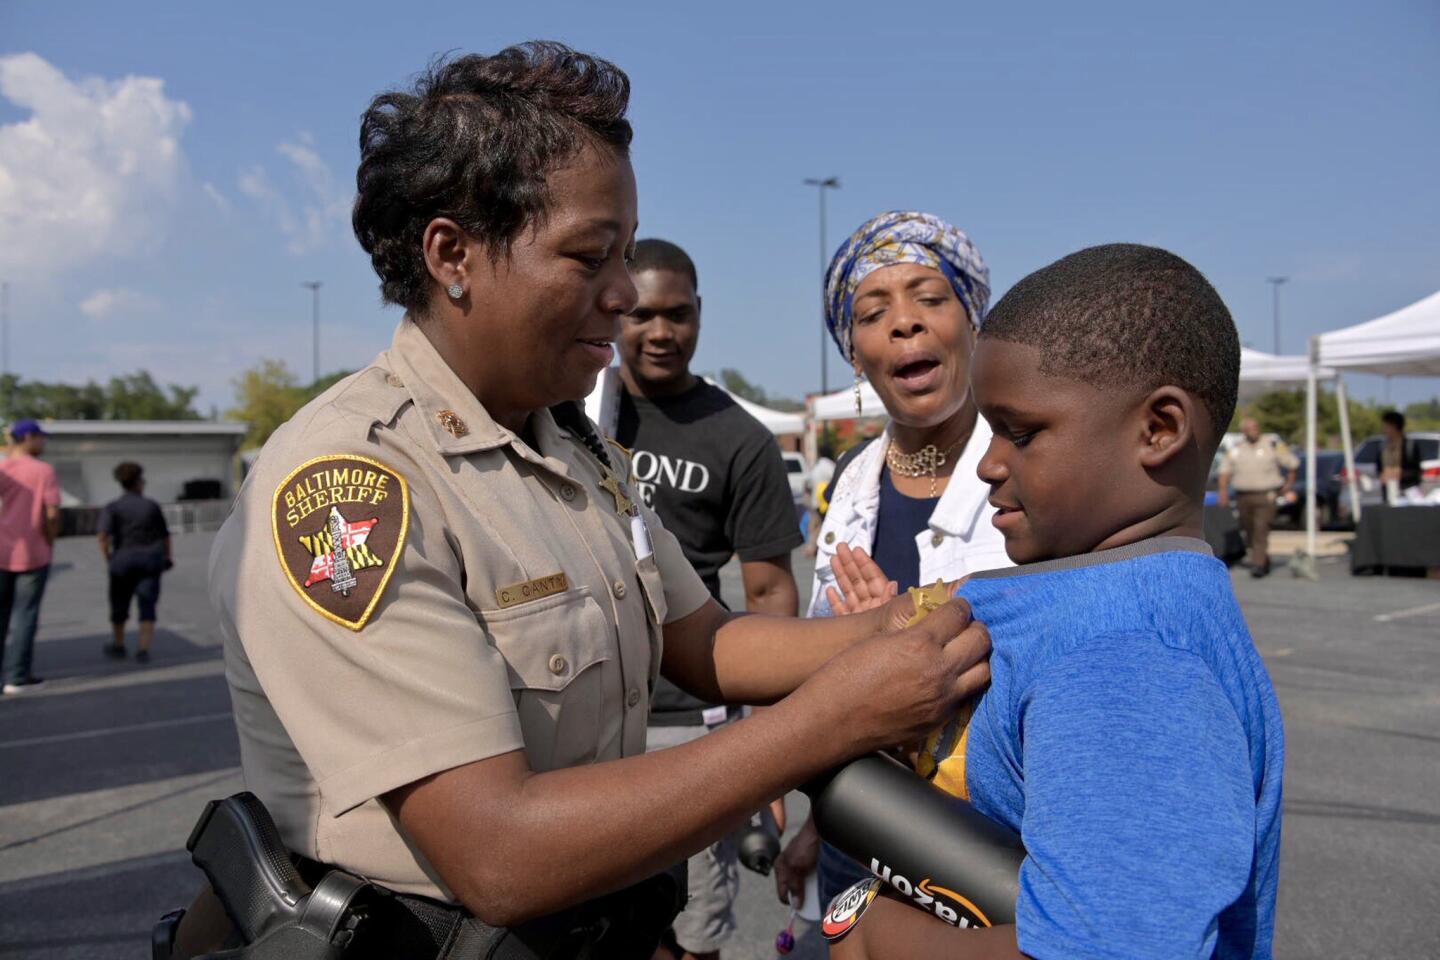 Baltimore deputy sheriff Carol Canty pins a toy badge on Zayvion Davis, 8 of Reservoir Hill with grandmother Lauren Muhammad and cousin Khalil Davis, 15 looking on at a National Night Out event at Mondawmin Mall on August 6, 2019.